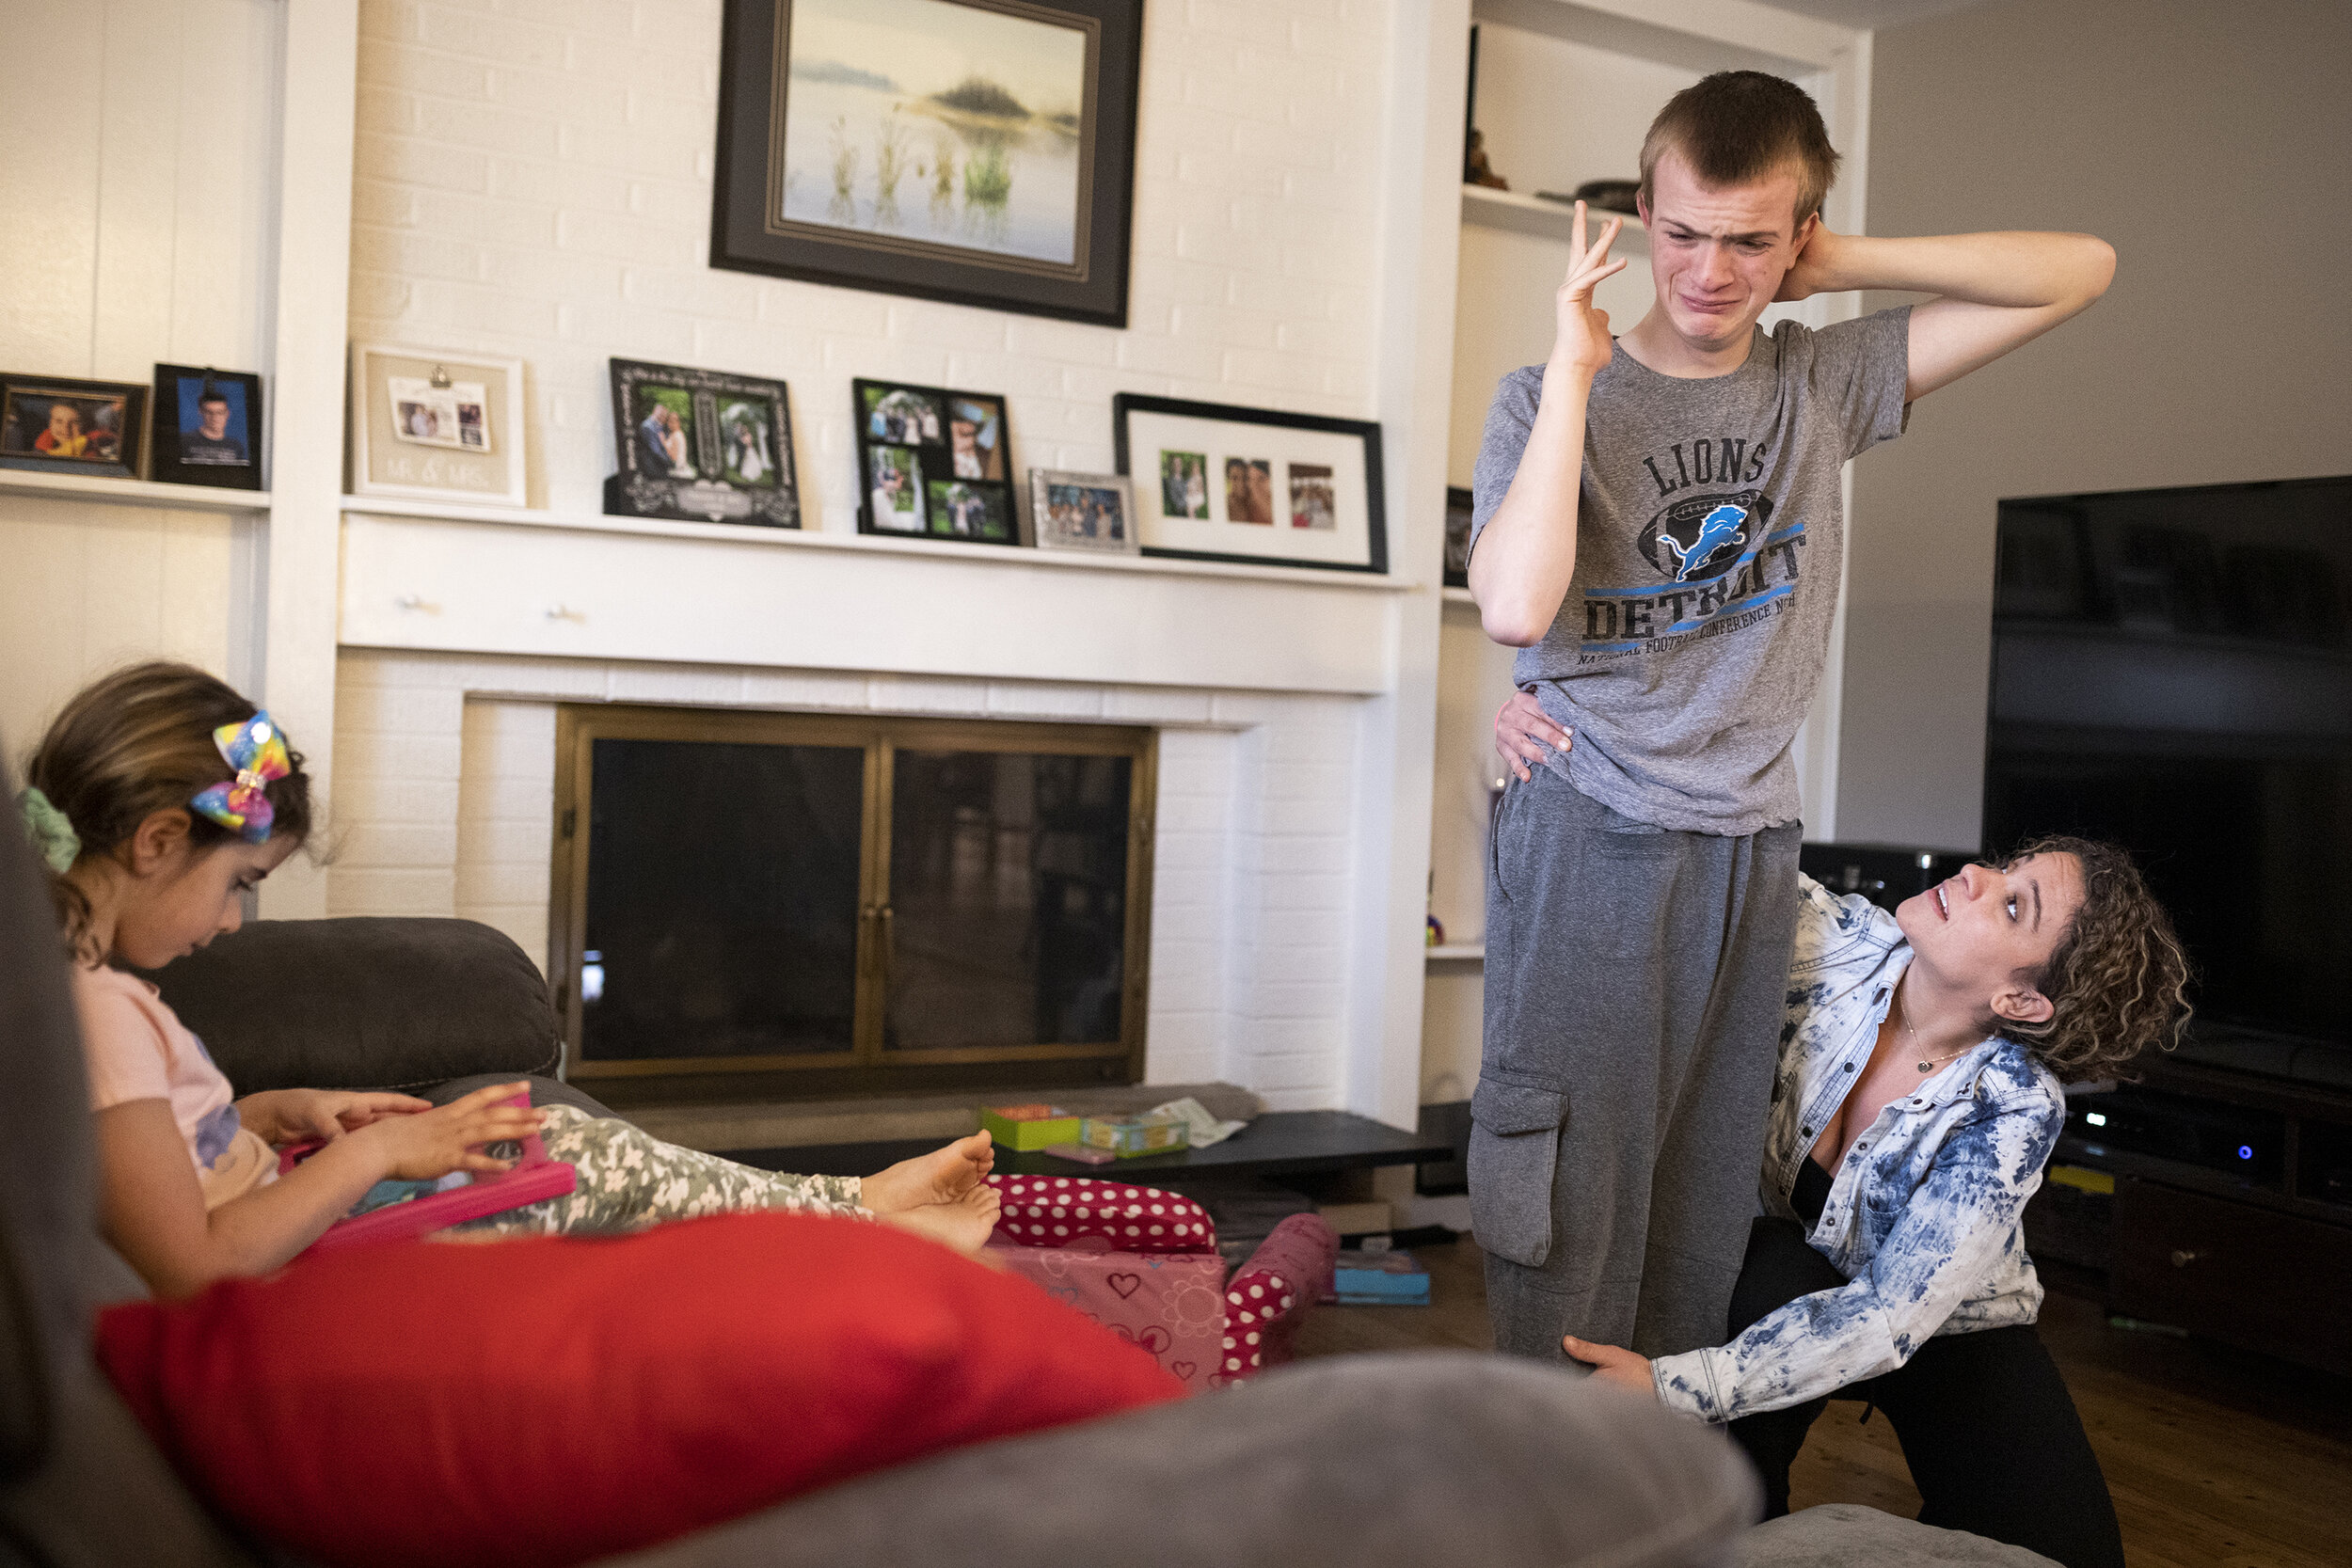  Danielle Vernon-Carleton helps her step-son Jackson, 16, balance on a pillow during his online physical therapy exercises while her daughter Bella, 6, plays on a tablet on Wednesday, March 10, 2021, in Troy. Danielle had to resign from her job as a 